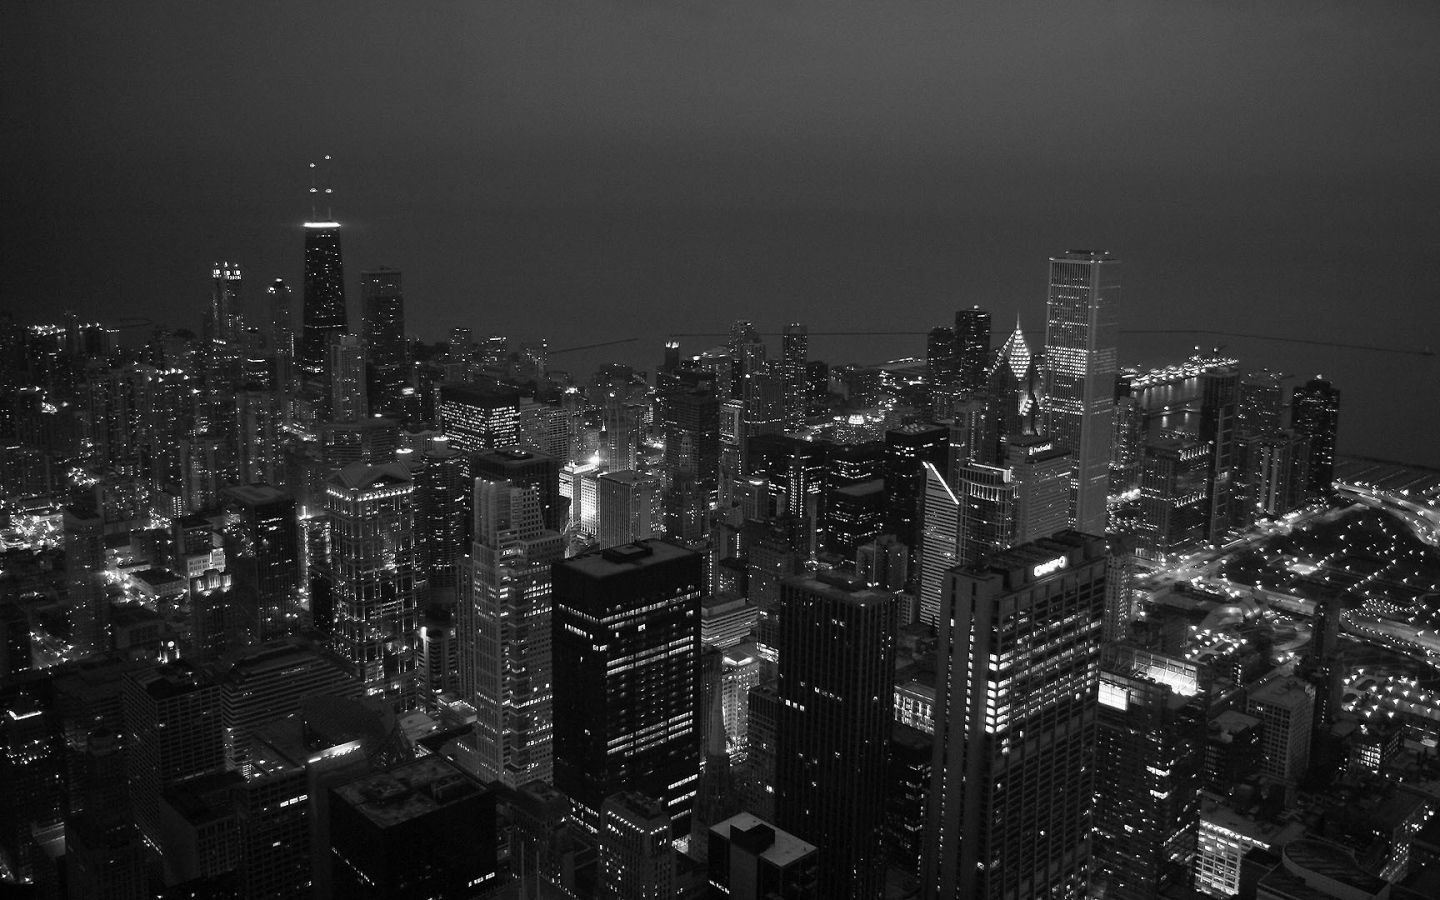 A black and white photo of the city - 1440x900